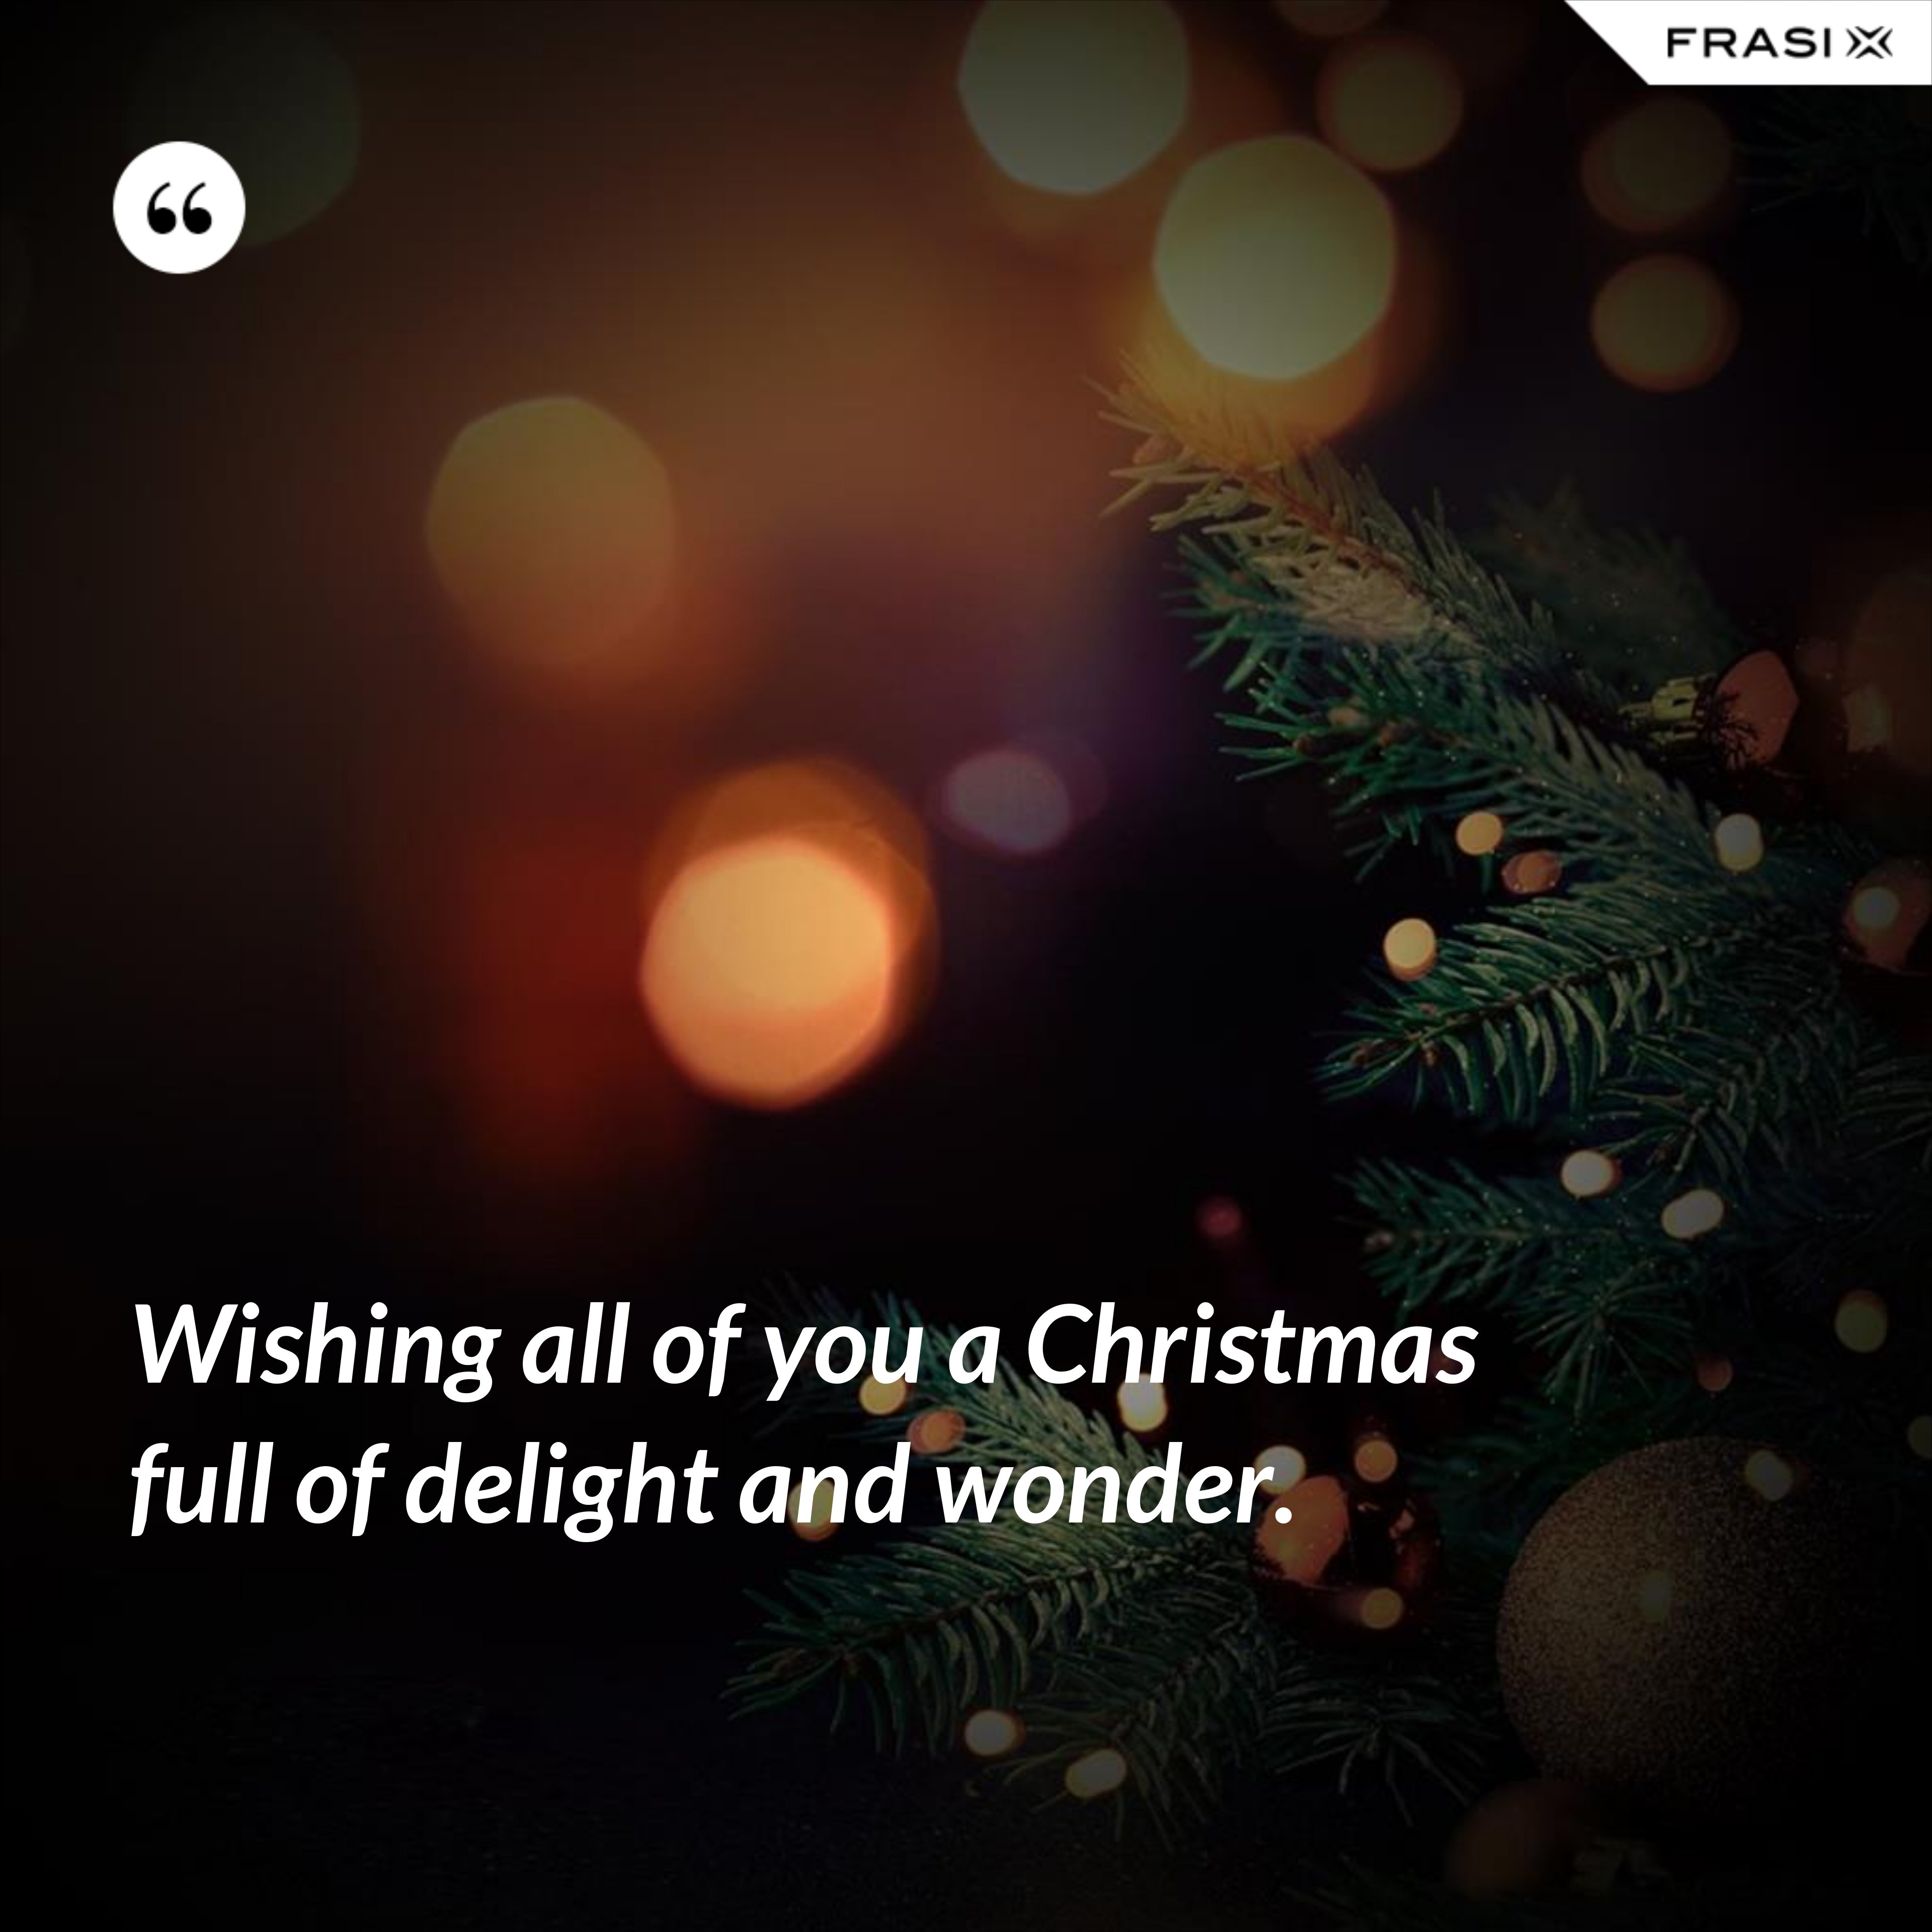 Wishing all of you a Christmas full of delight and wonder. - Anonimo